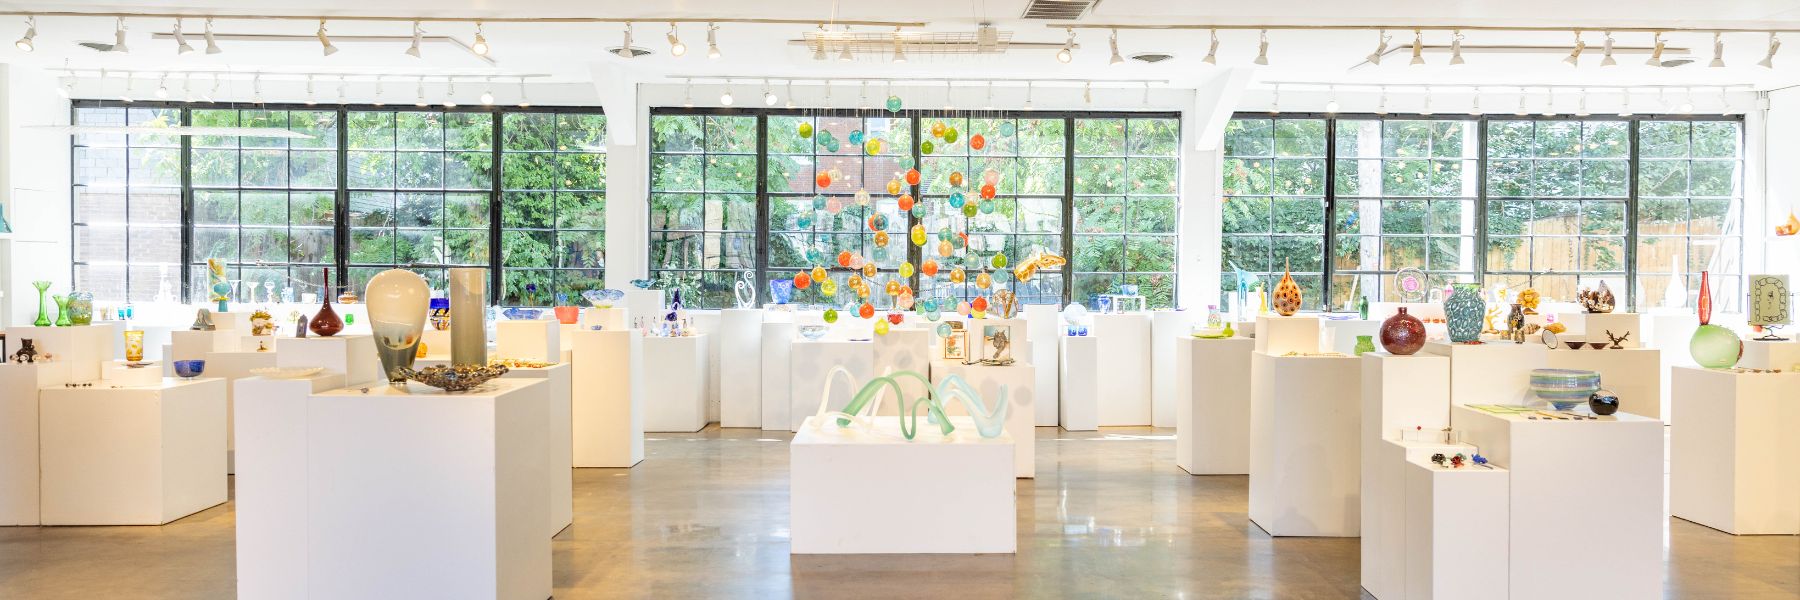 Third Degree Glass Factory has an on-site shop with a variety of glass artworks for sale.